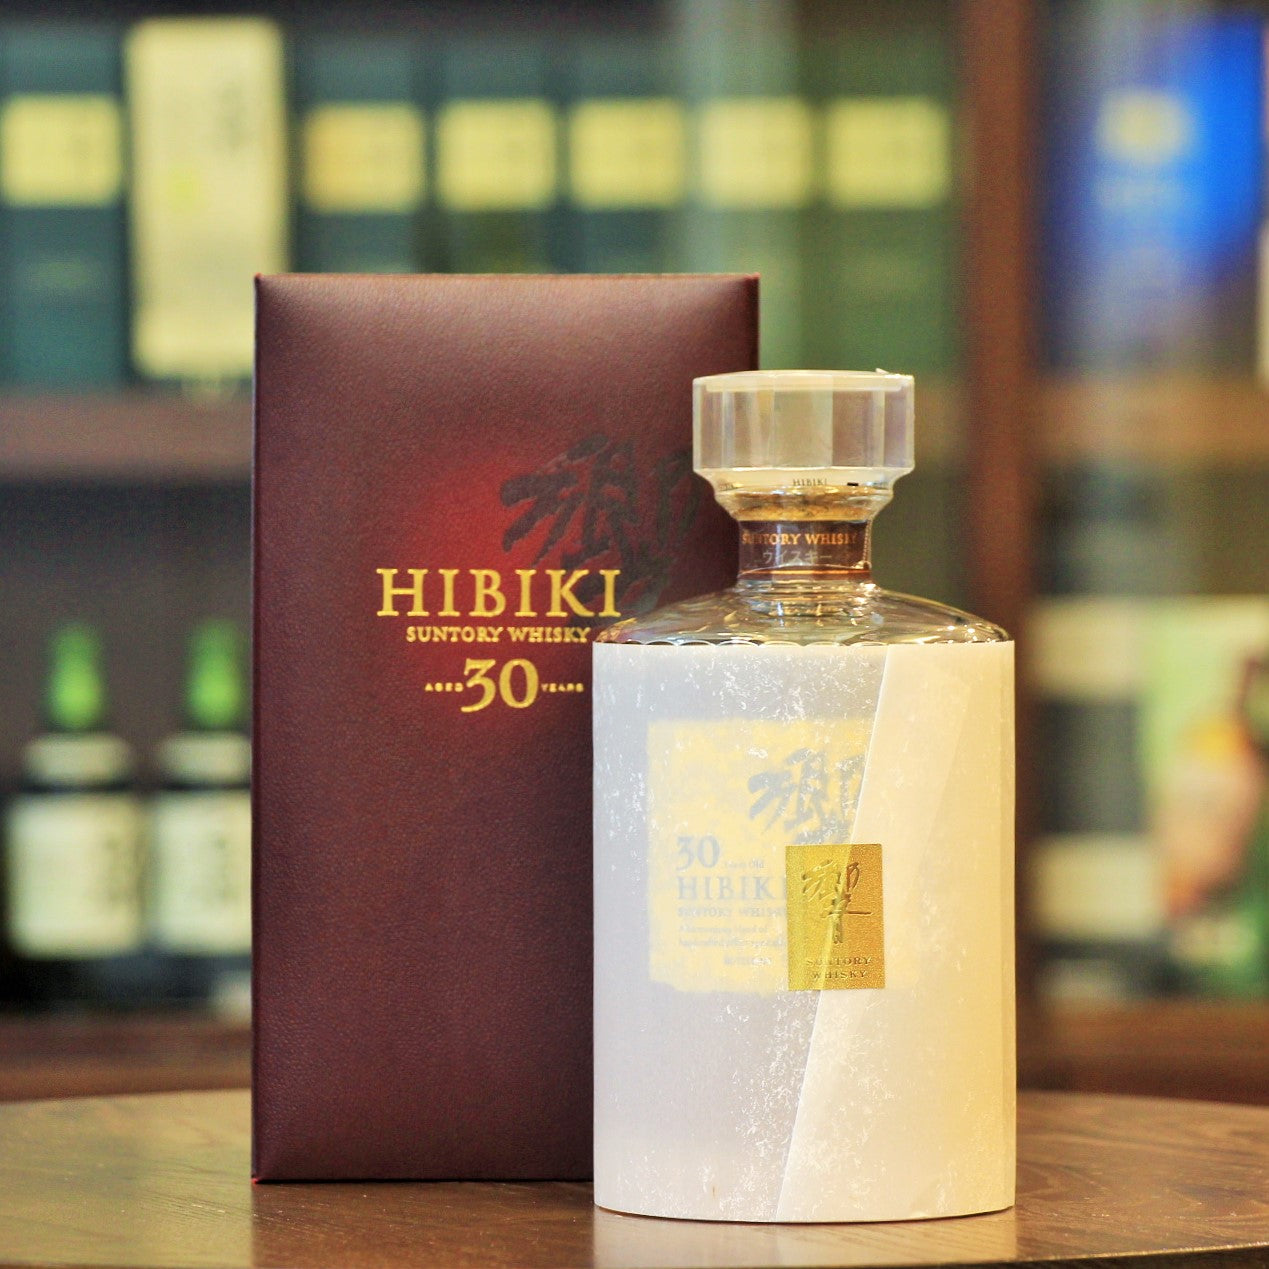 Between 2004 and 2008, this Hibiki 30 year old whisky from Suntory has been awarded multiple times by International Spirits Challenge and World Whiskies Awards. Please note that the bottle number in the image is only for reference.